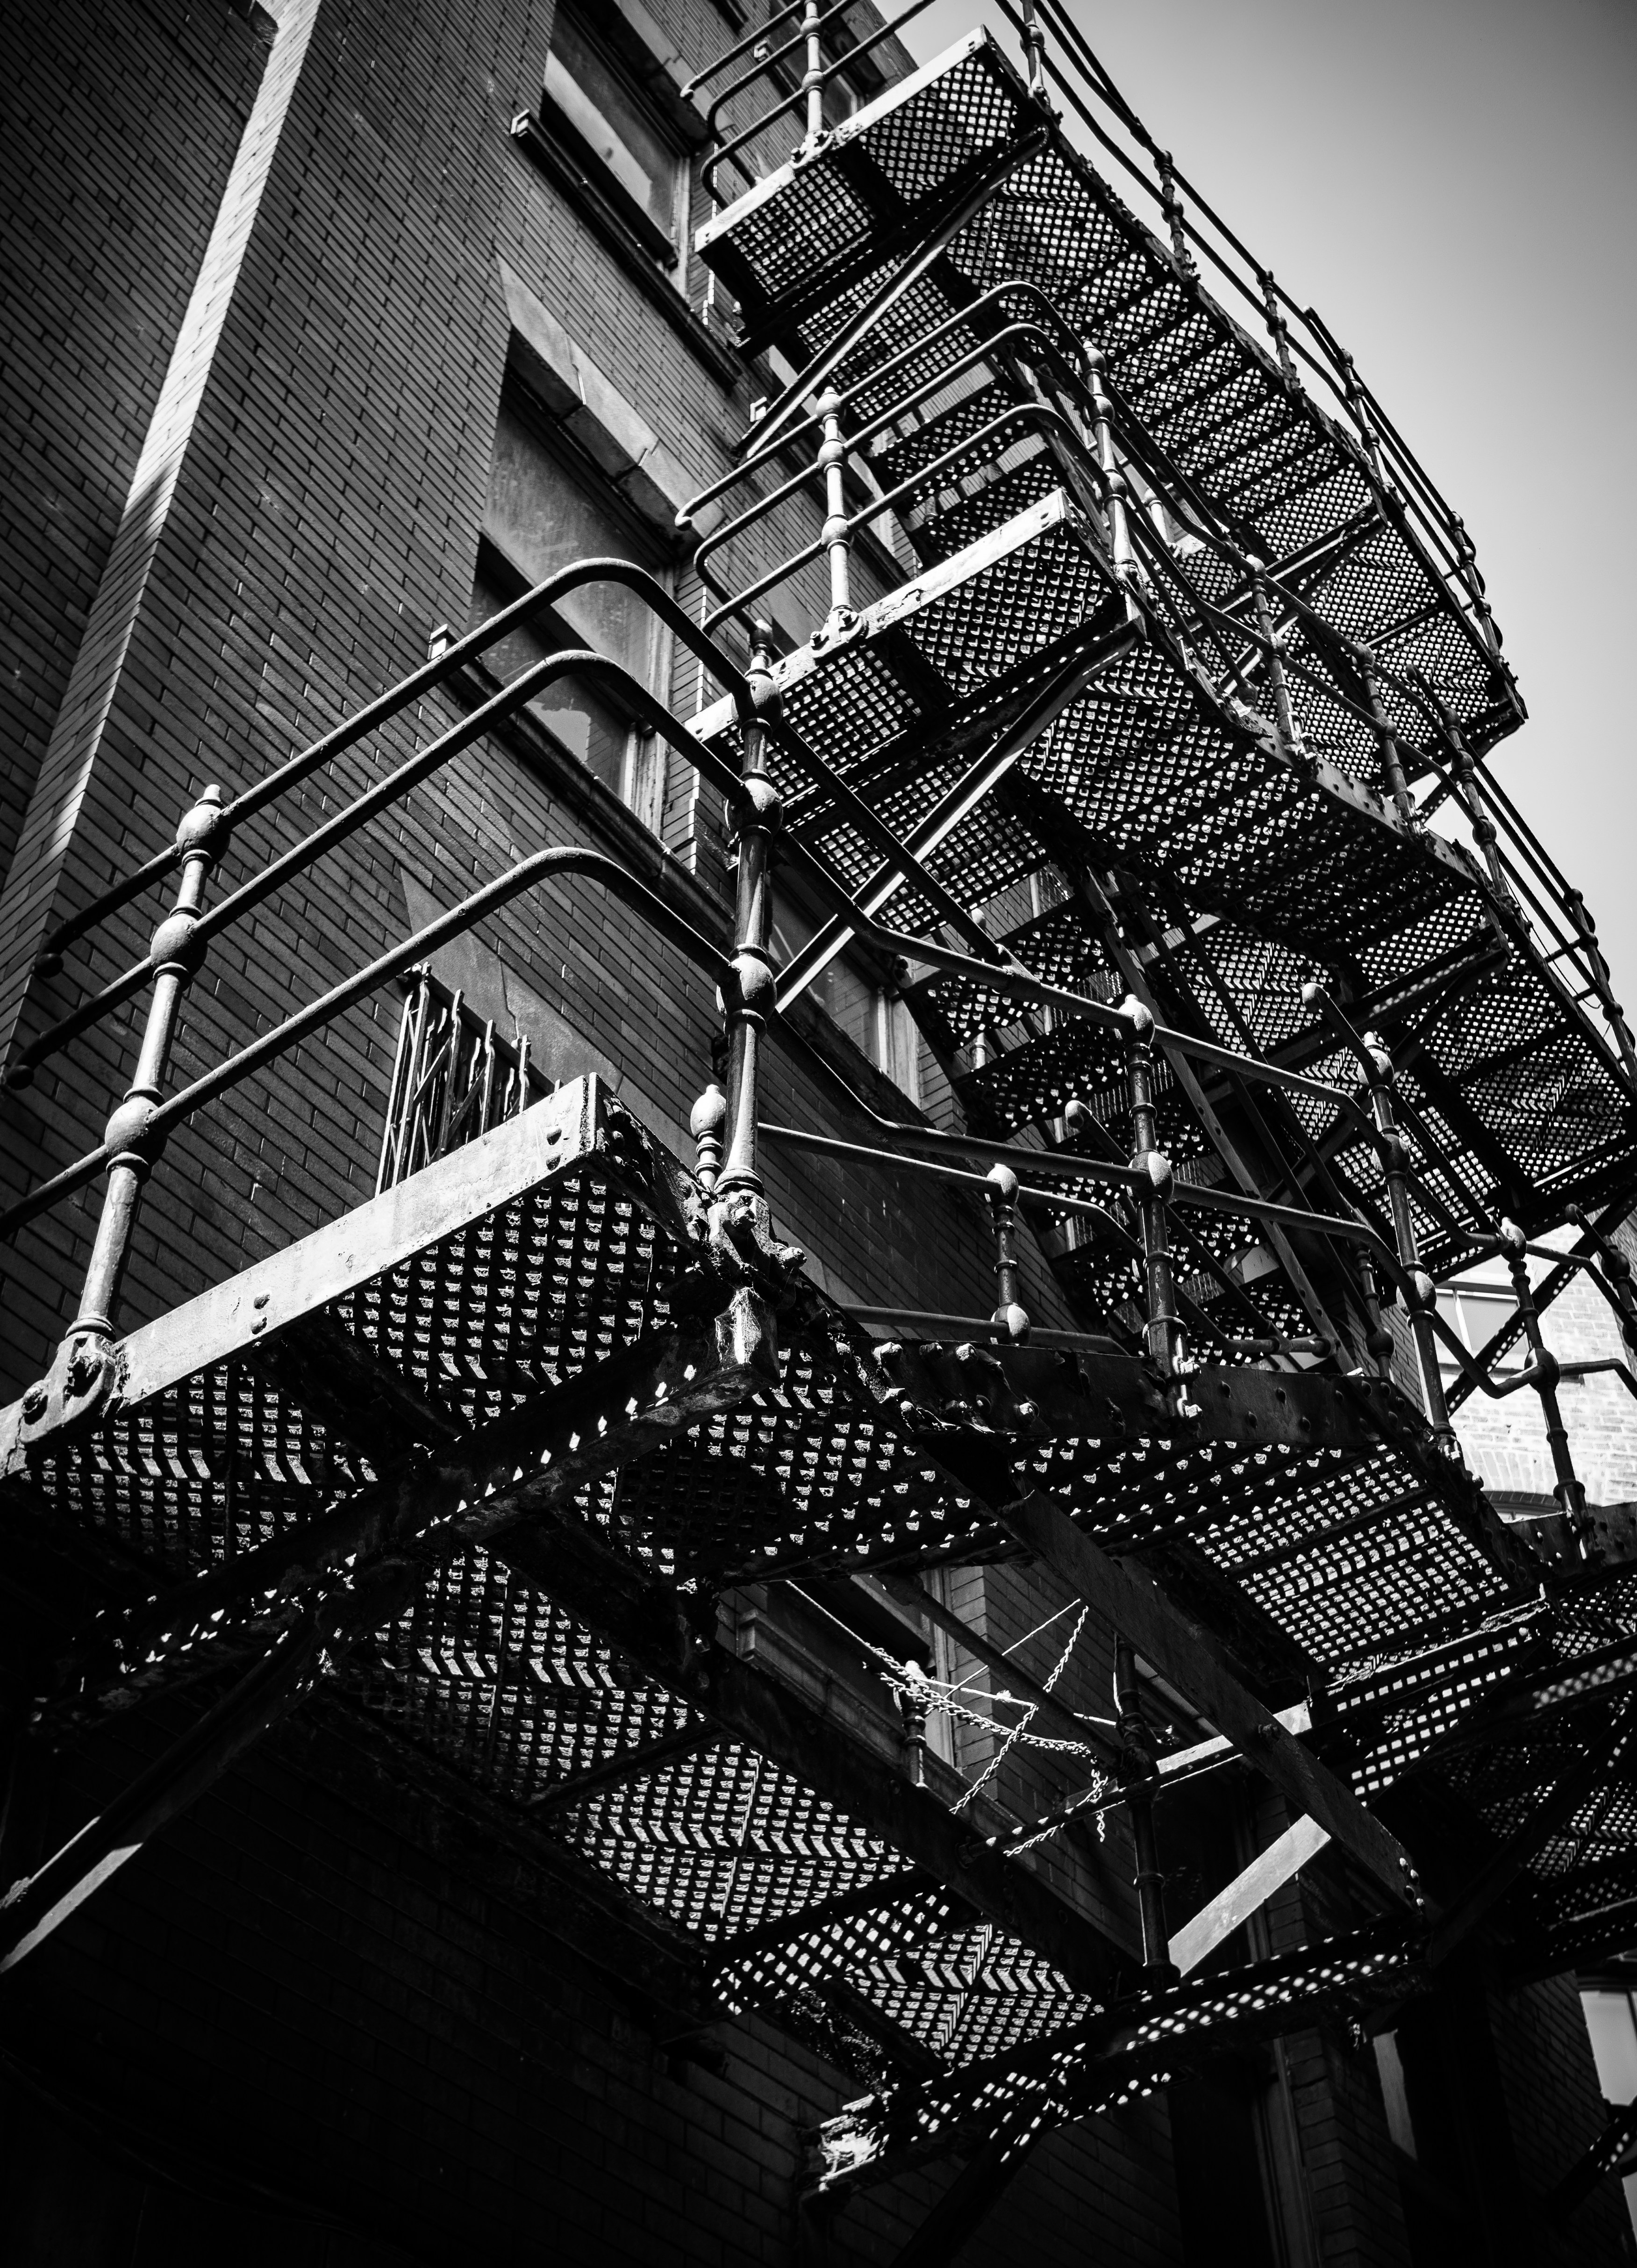 A fire escape in a back alley.